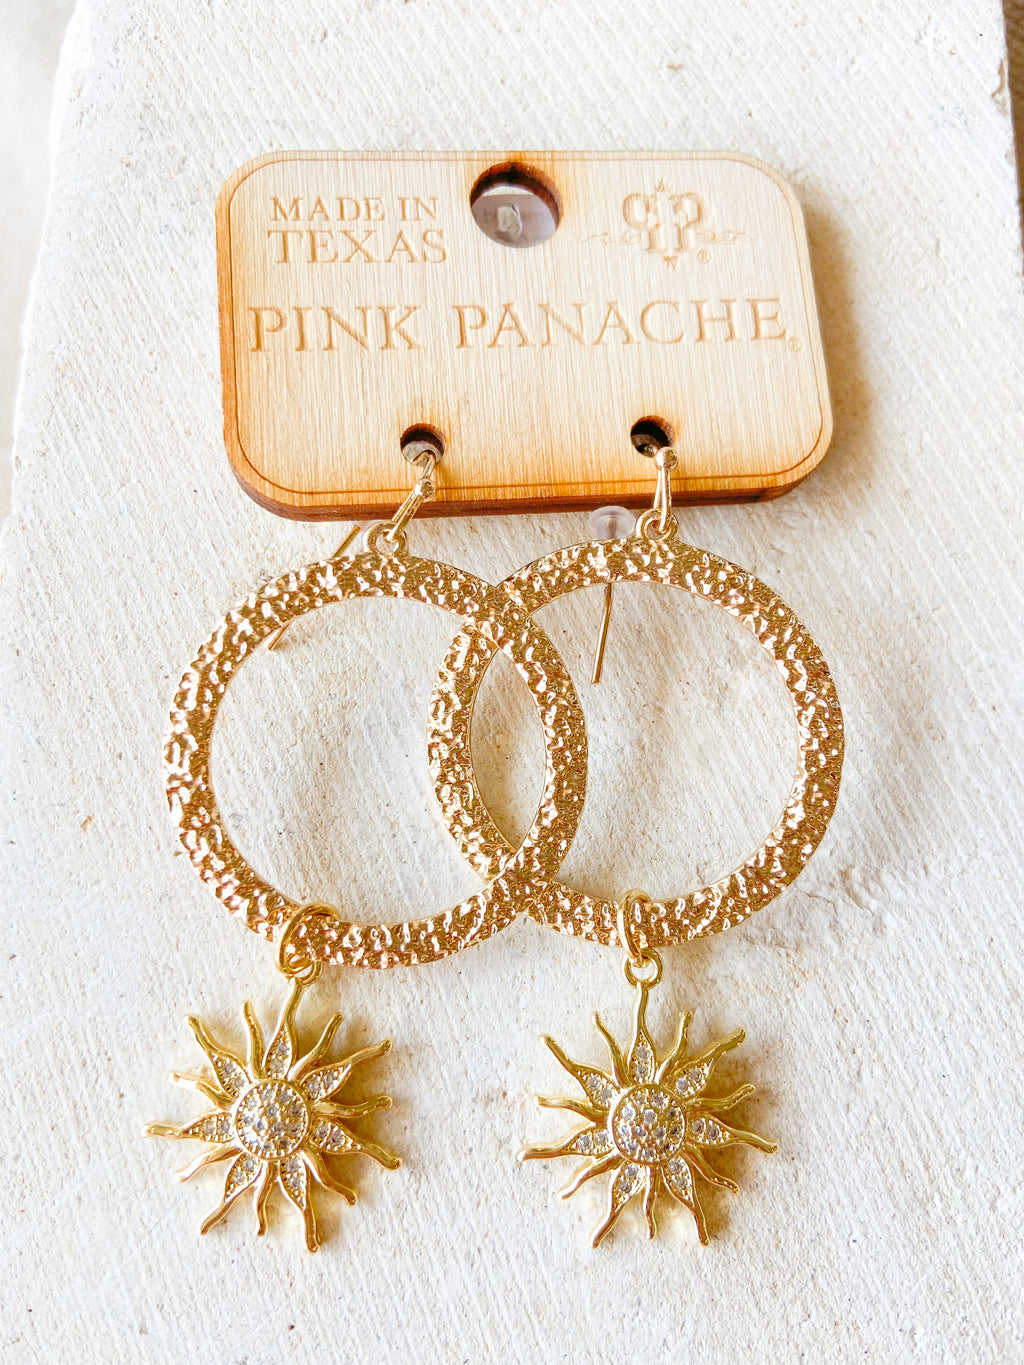 Pink Panache Hammered Gold Celestial Earrings